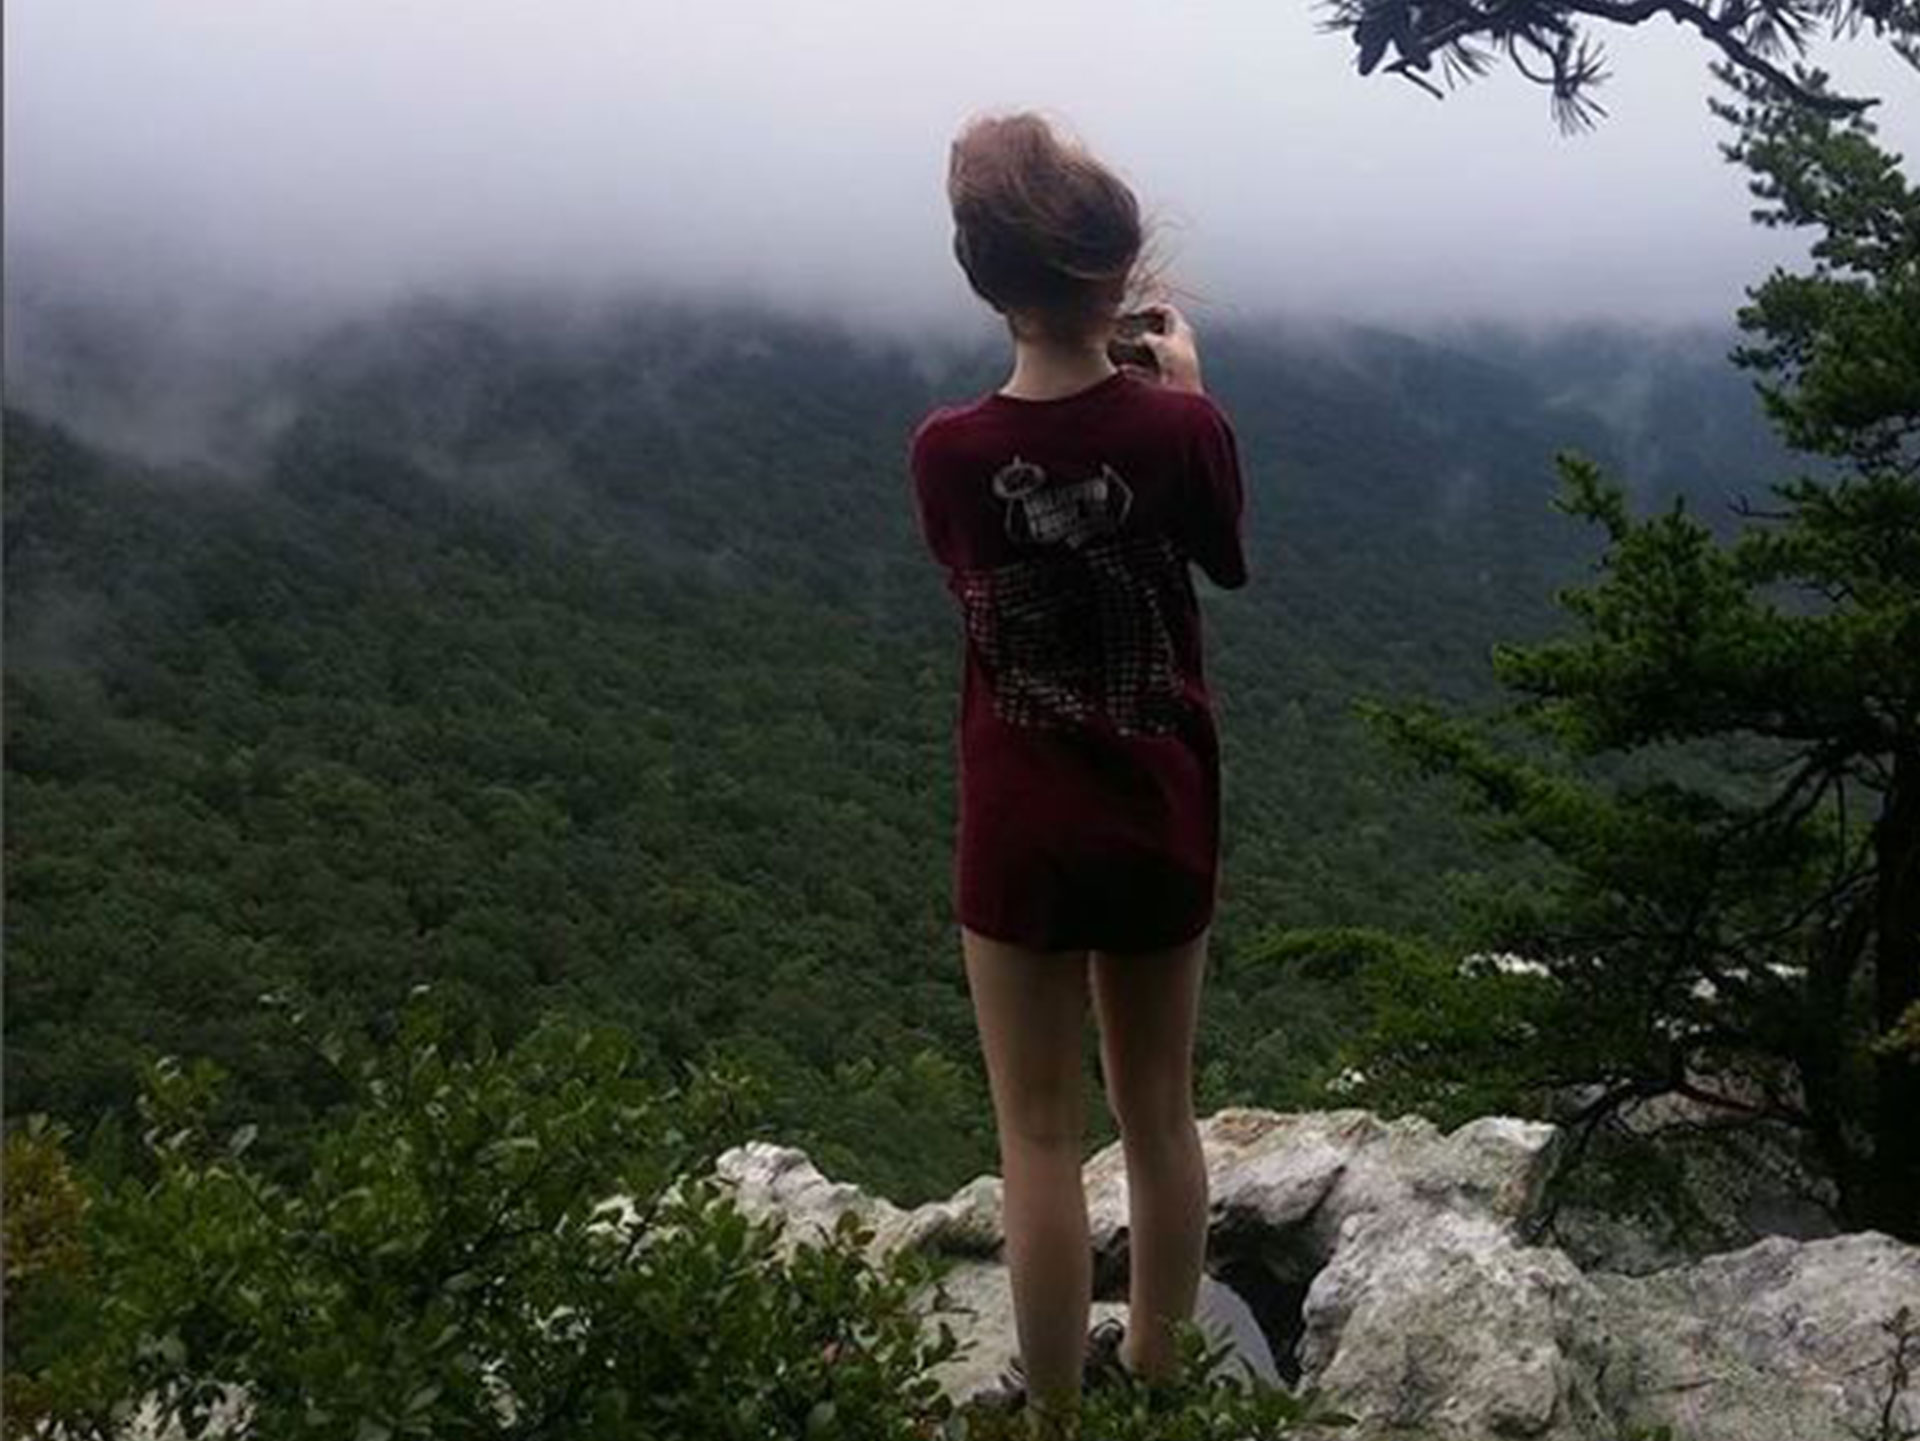 Man posts chilling photos of ex-girlfriend just hours after pushing her off a cliff